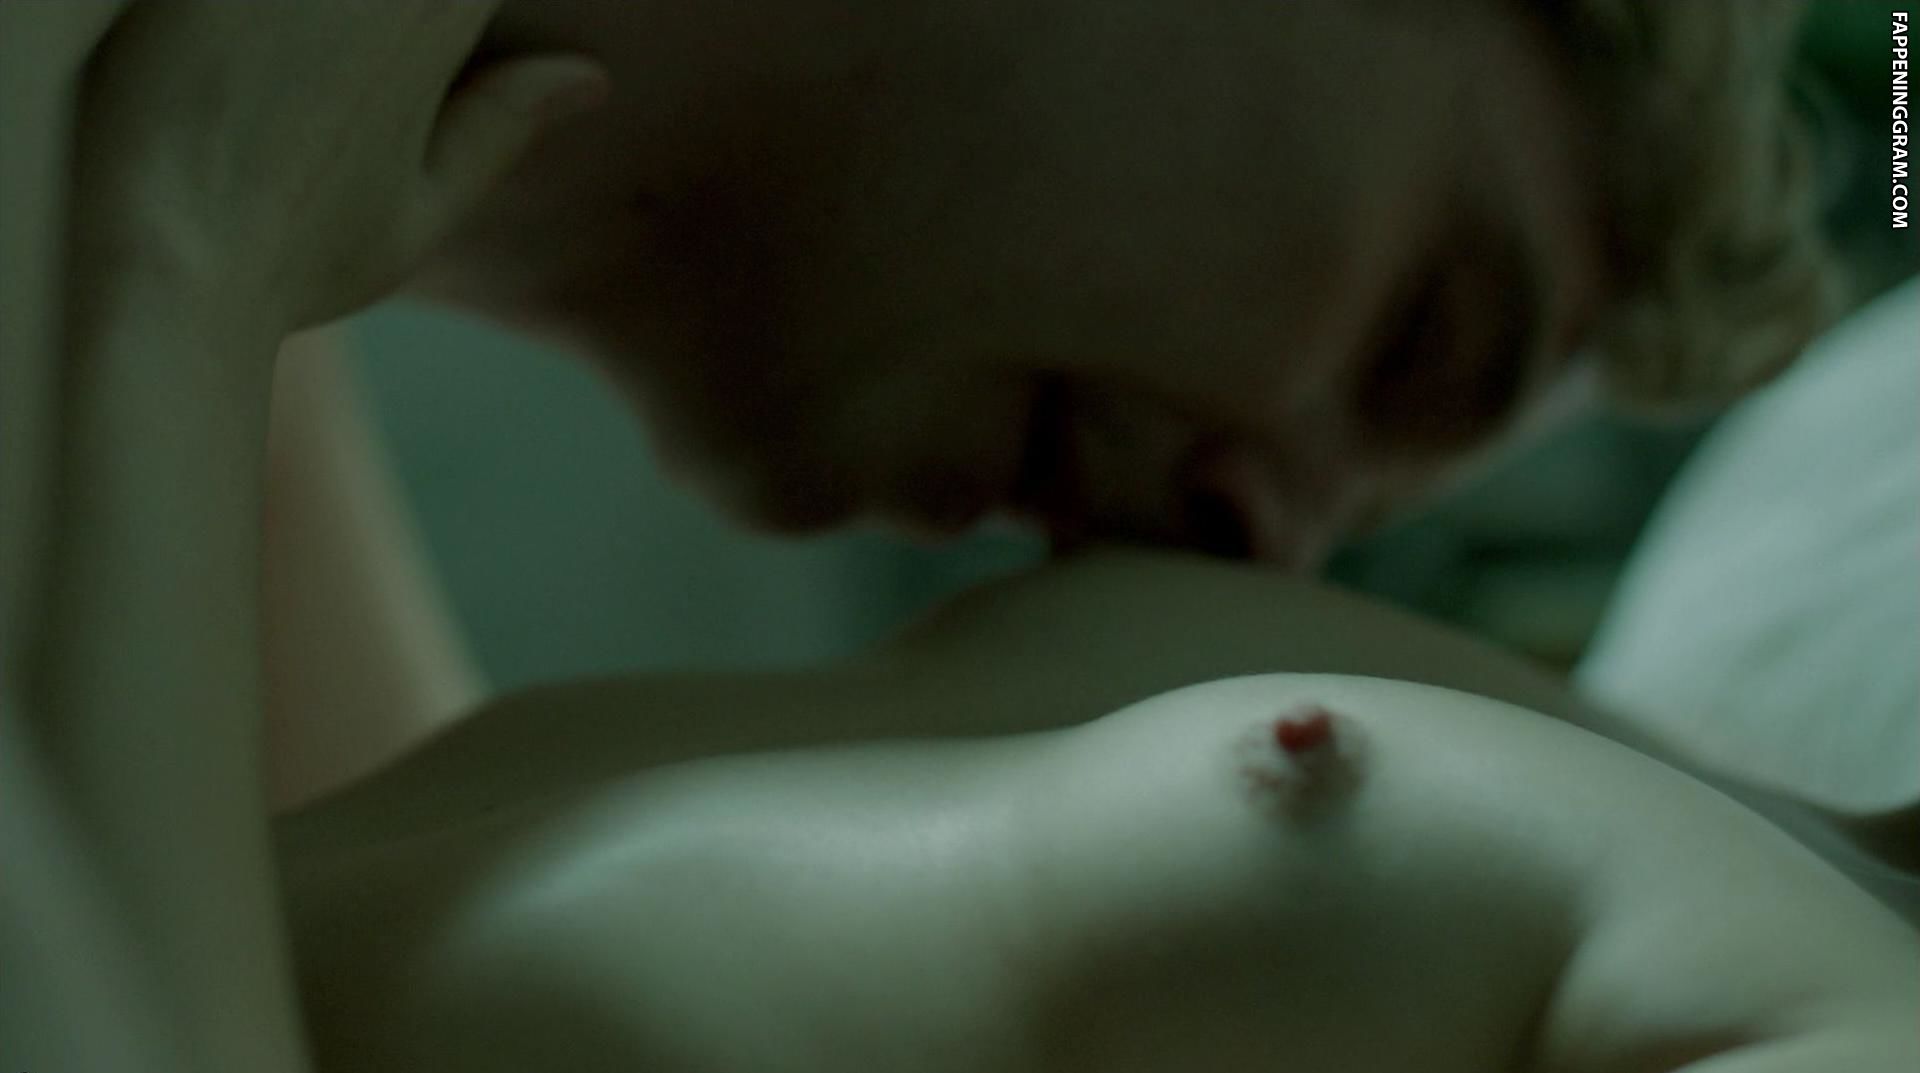 Adelaide Clemens Nude.